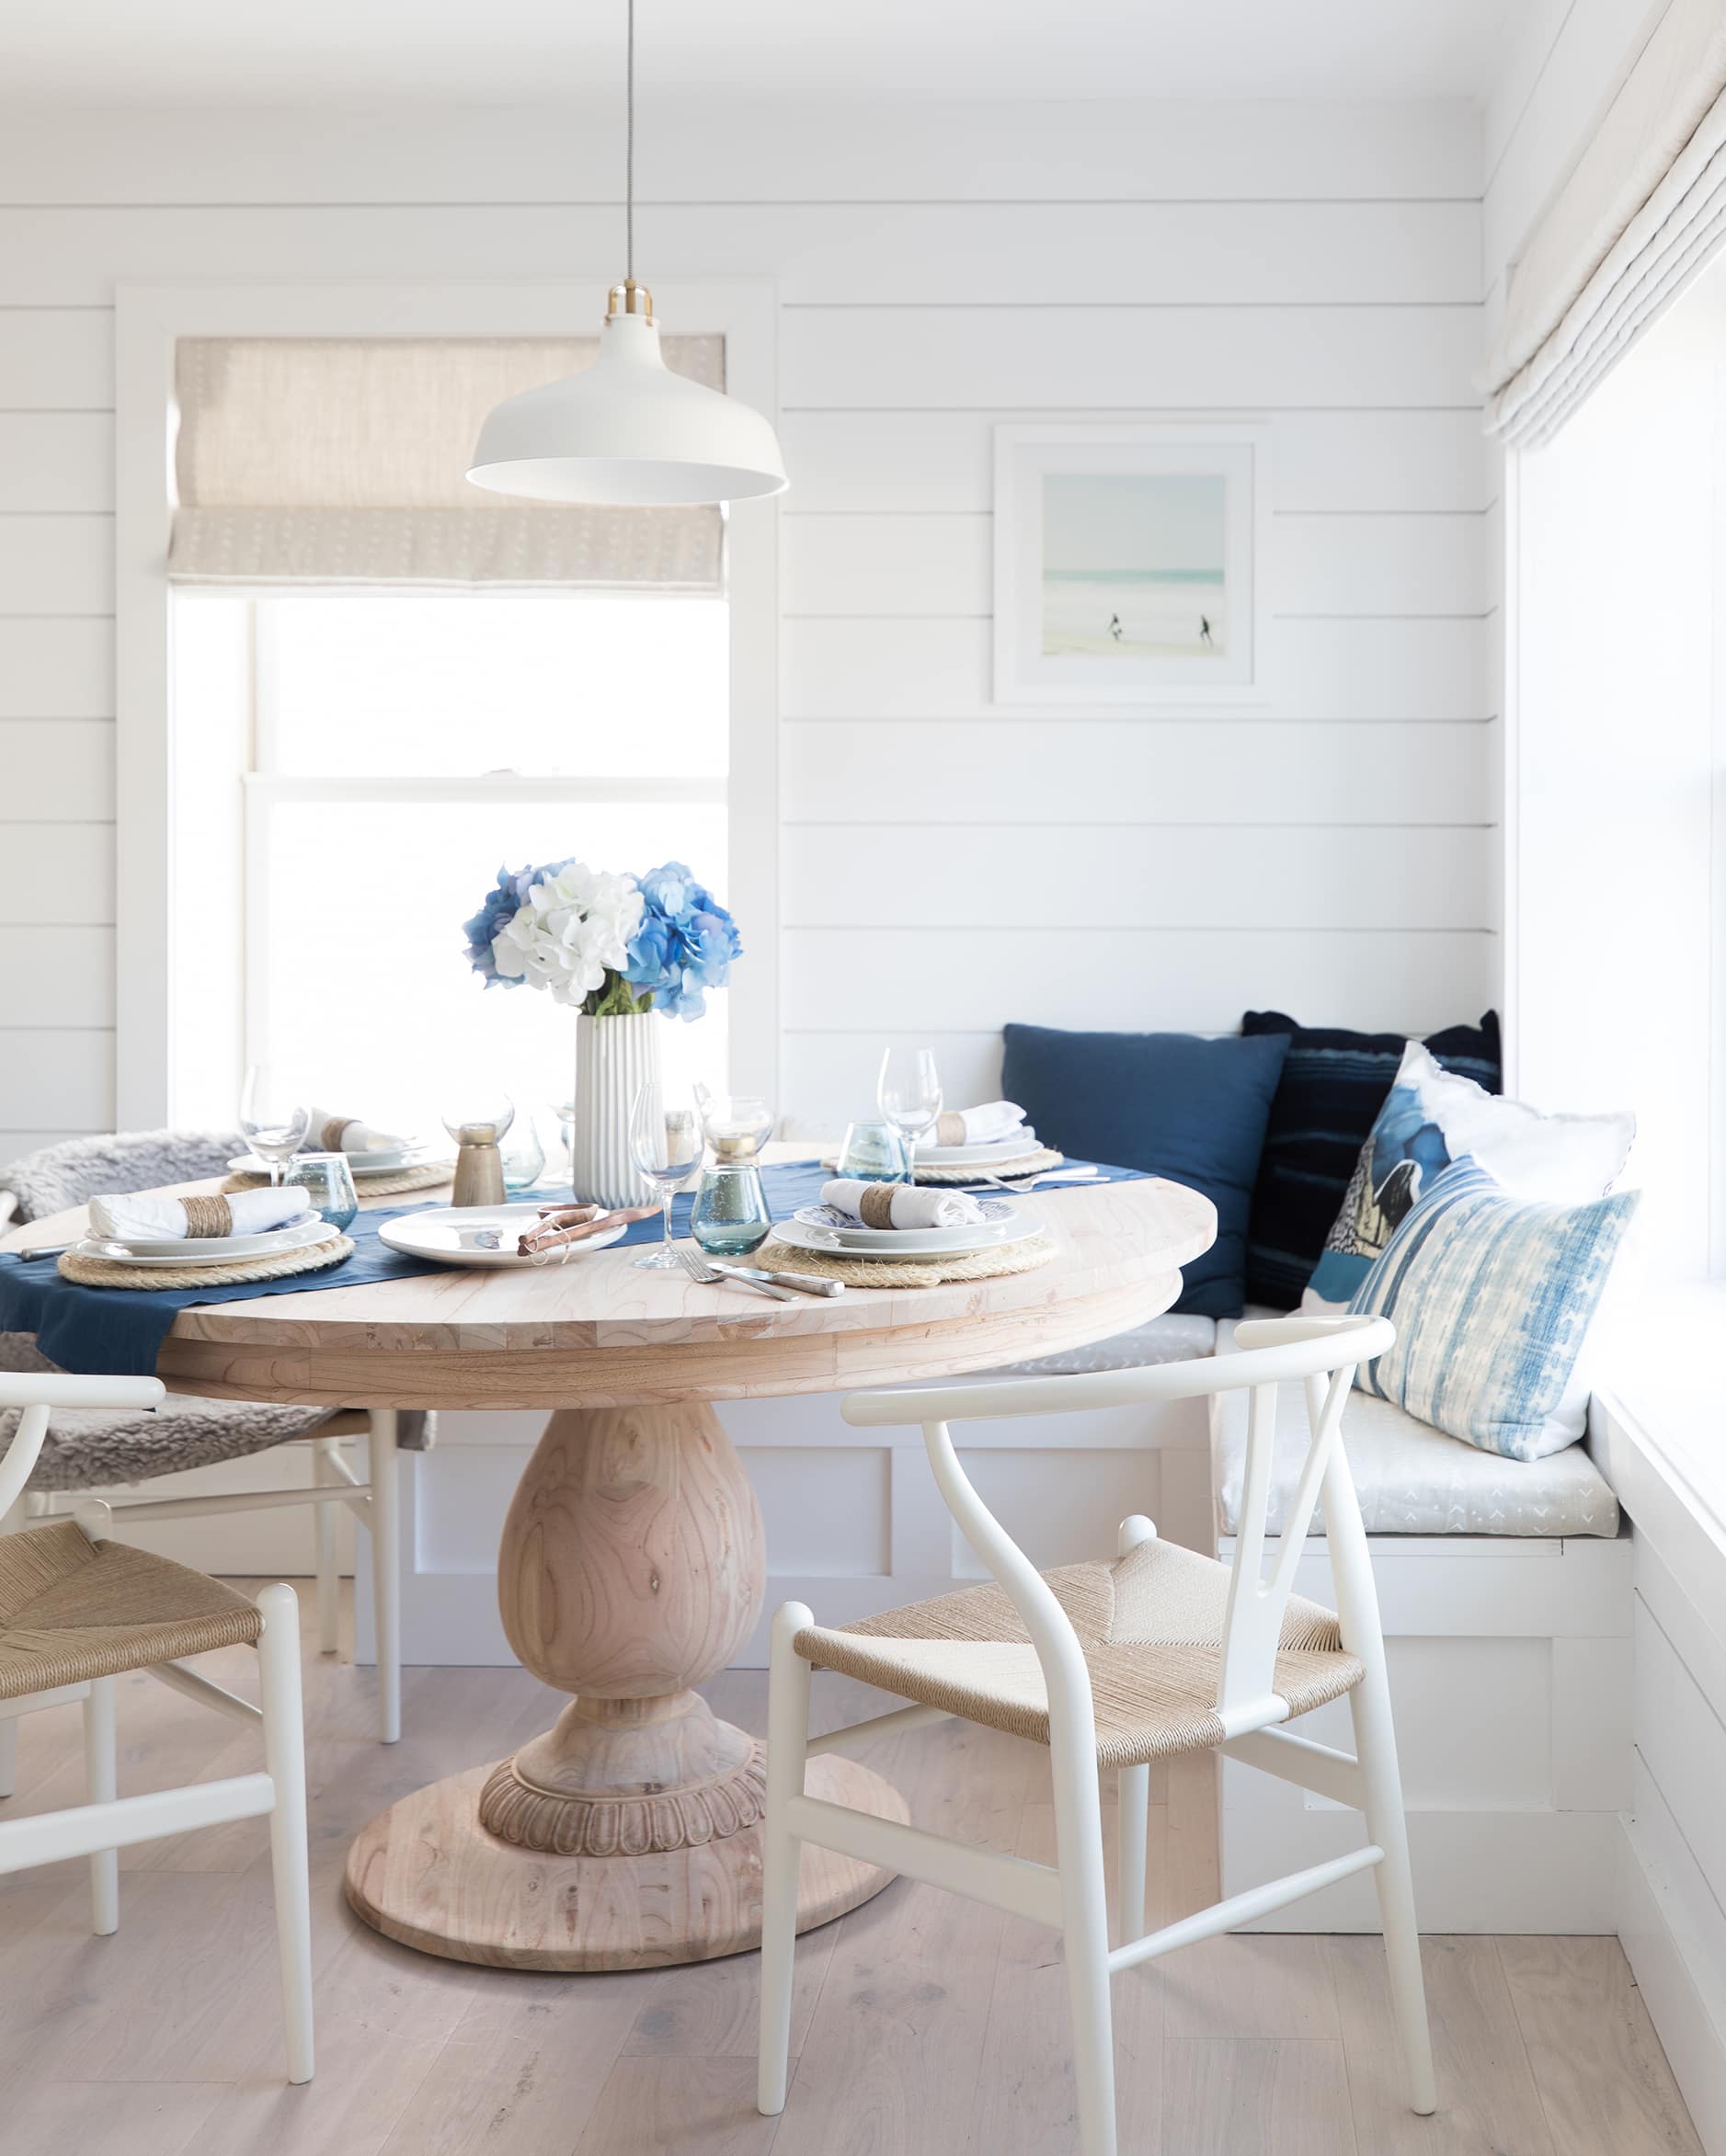 Breakfast nook area with a natural wood round table with white wishbone chairs, navy blue pillows, and white shiplap walls